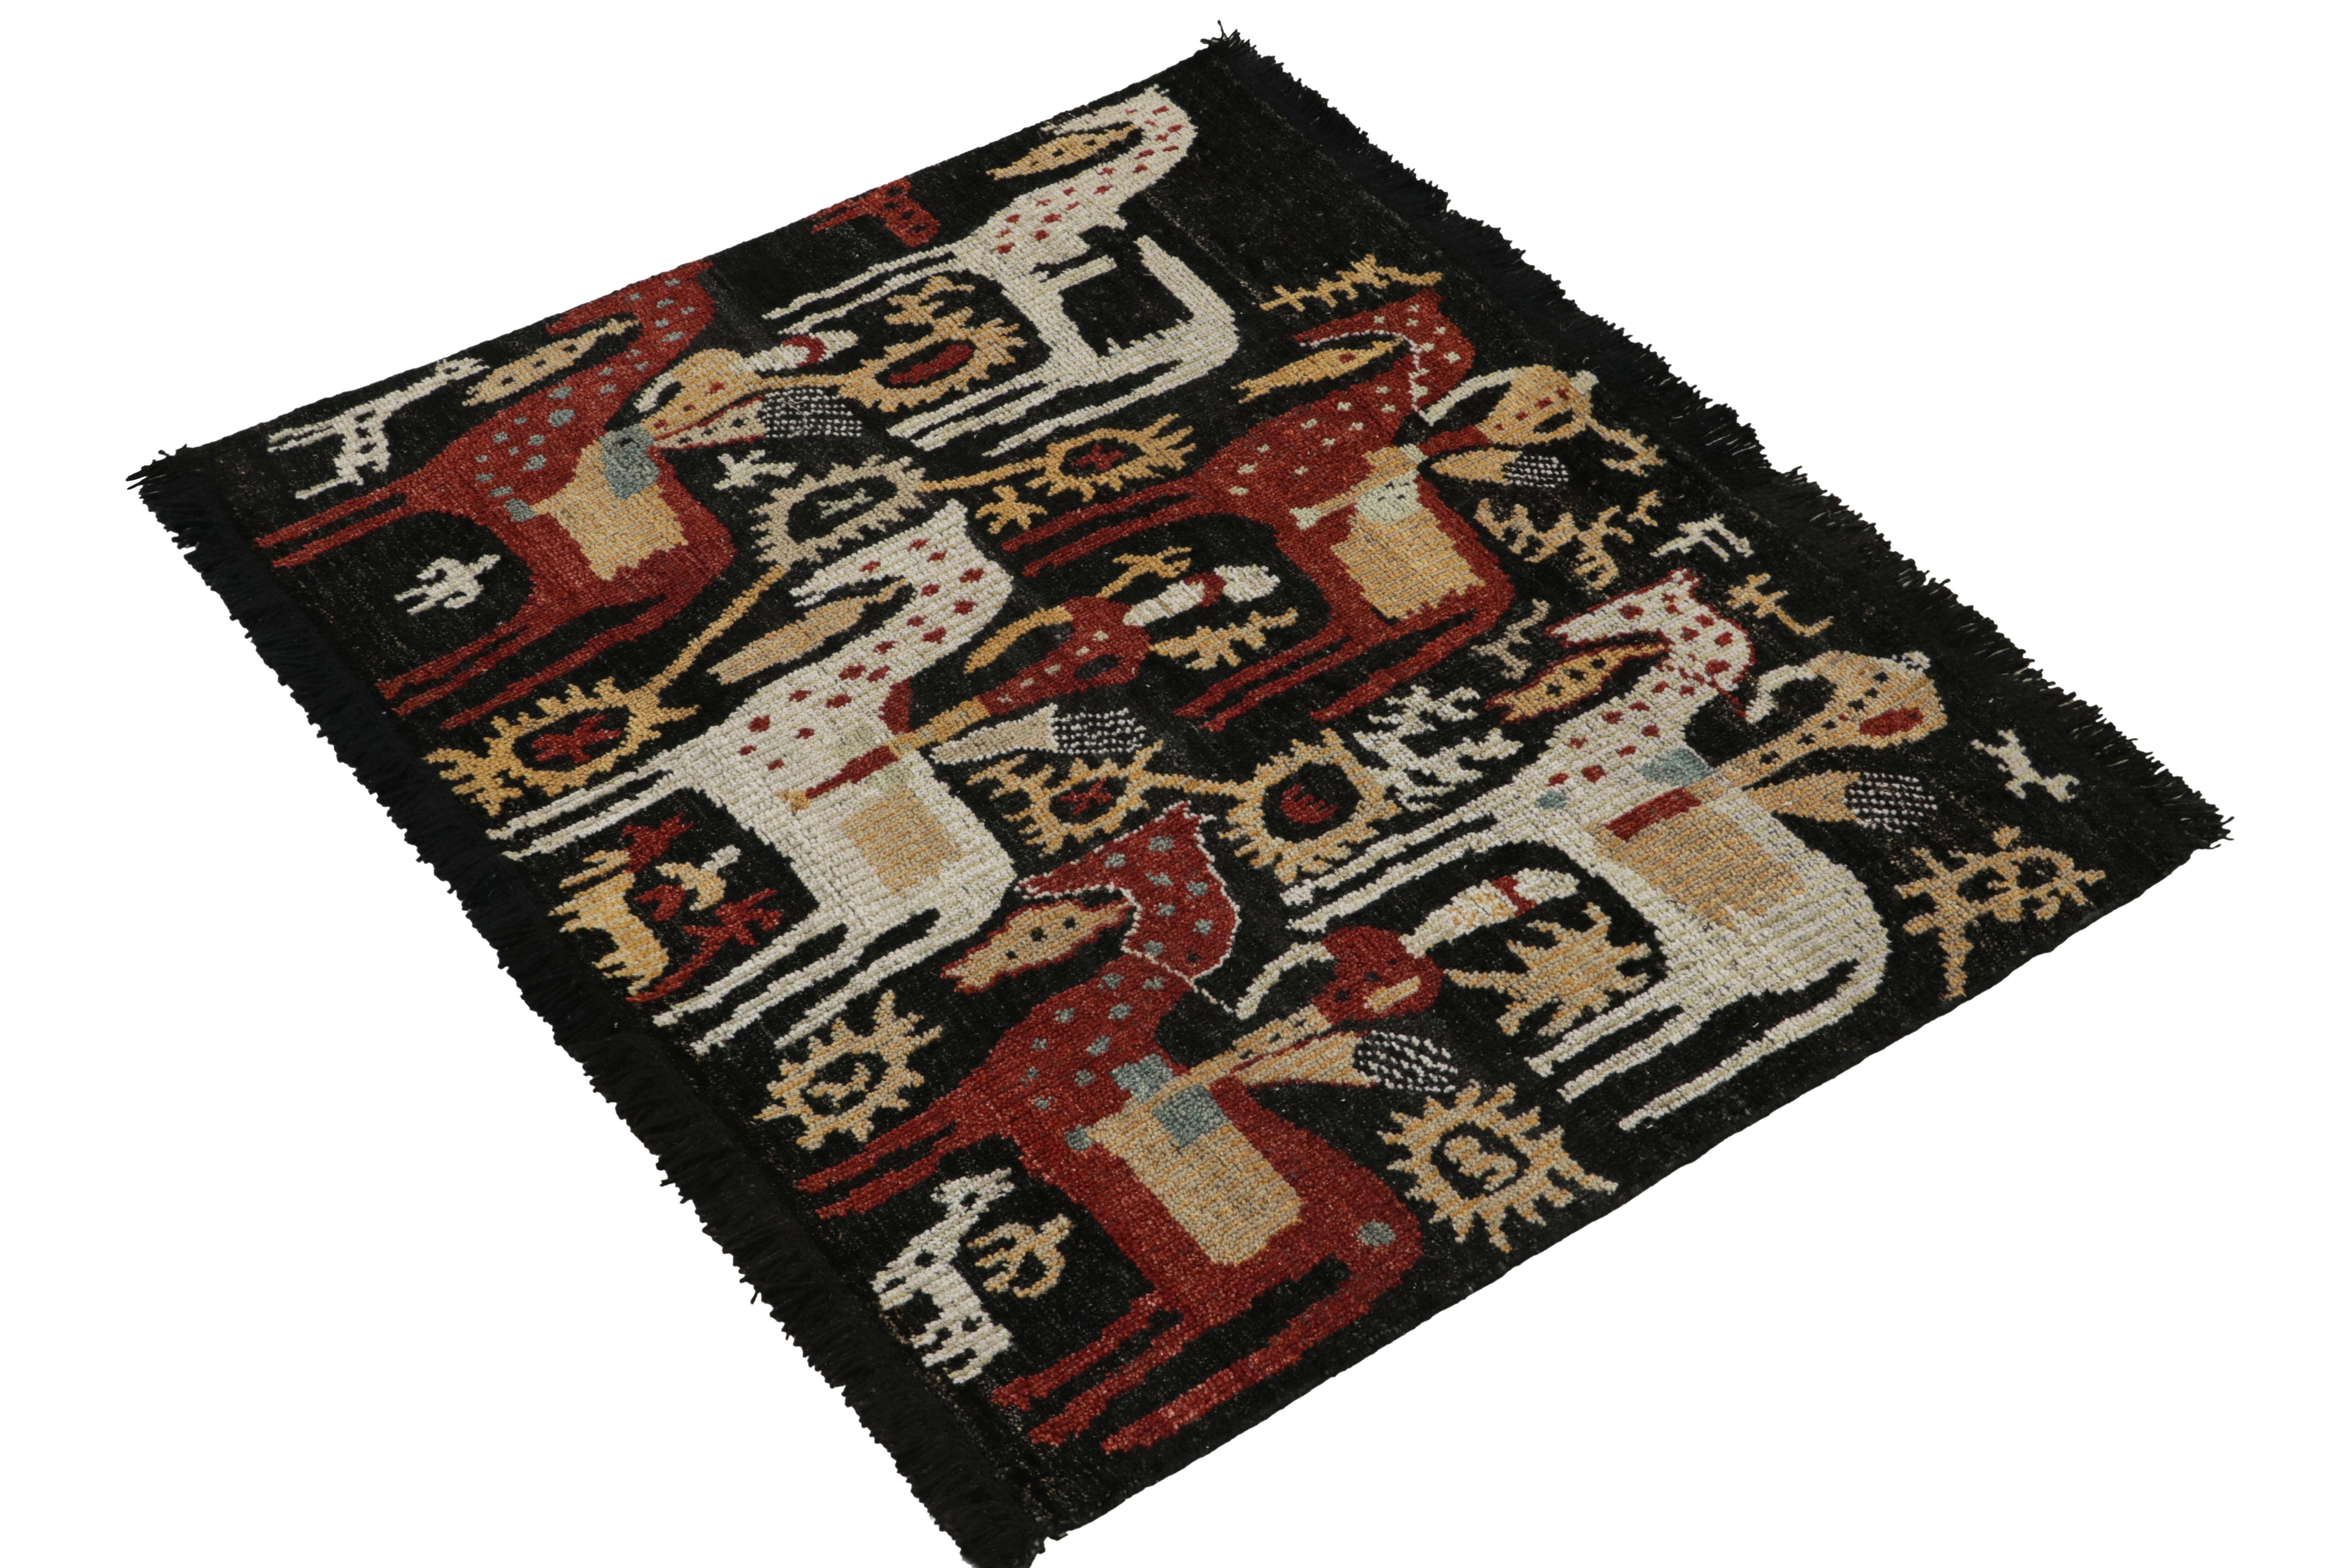 Connoting a refined modern take on tribal sensibilities, this 3x4 rug from the Burano Collection by Rug & Kilim reimagines a rare pictorial pattern of horsemen & animals. The nomadic rider theme boasts a daring colorway of white, brick red & gold